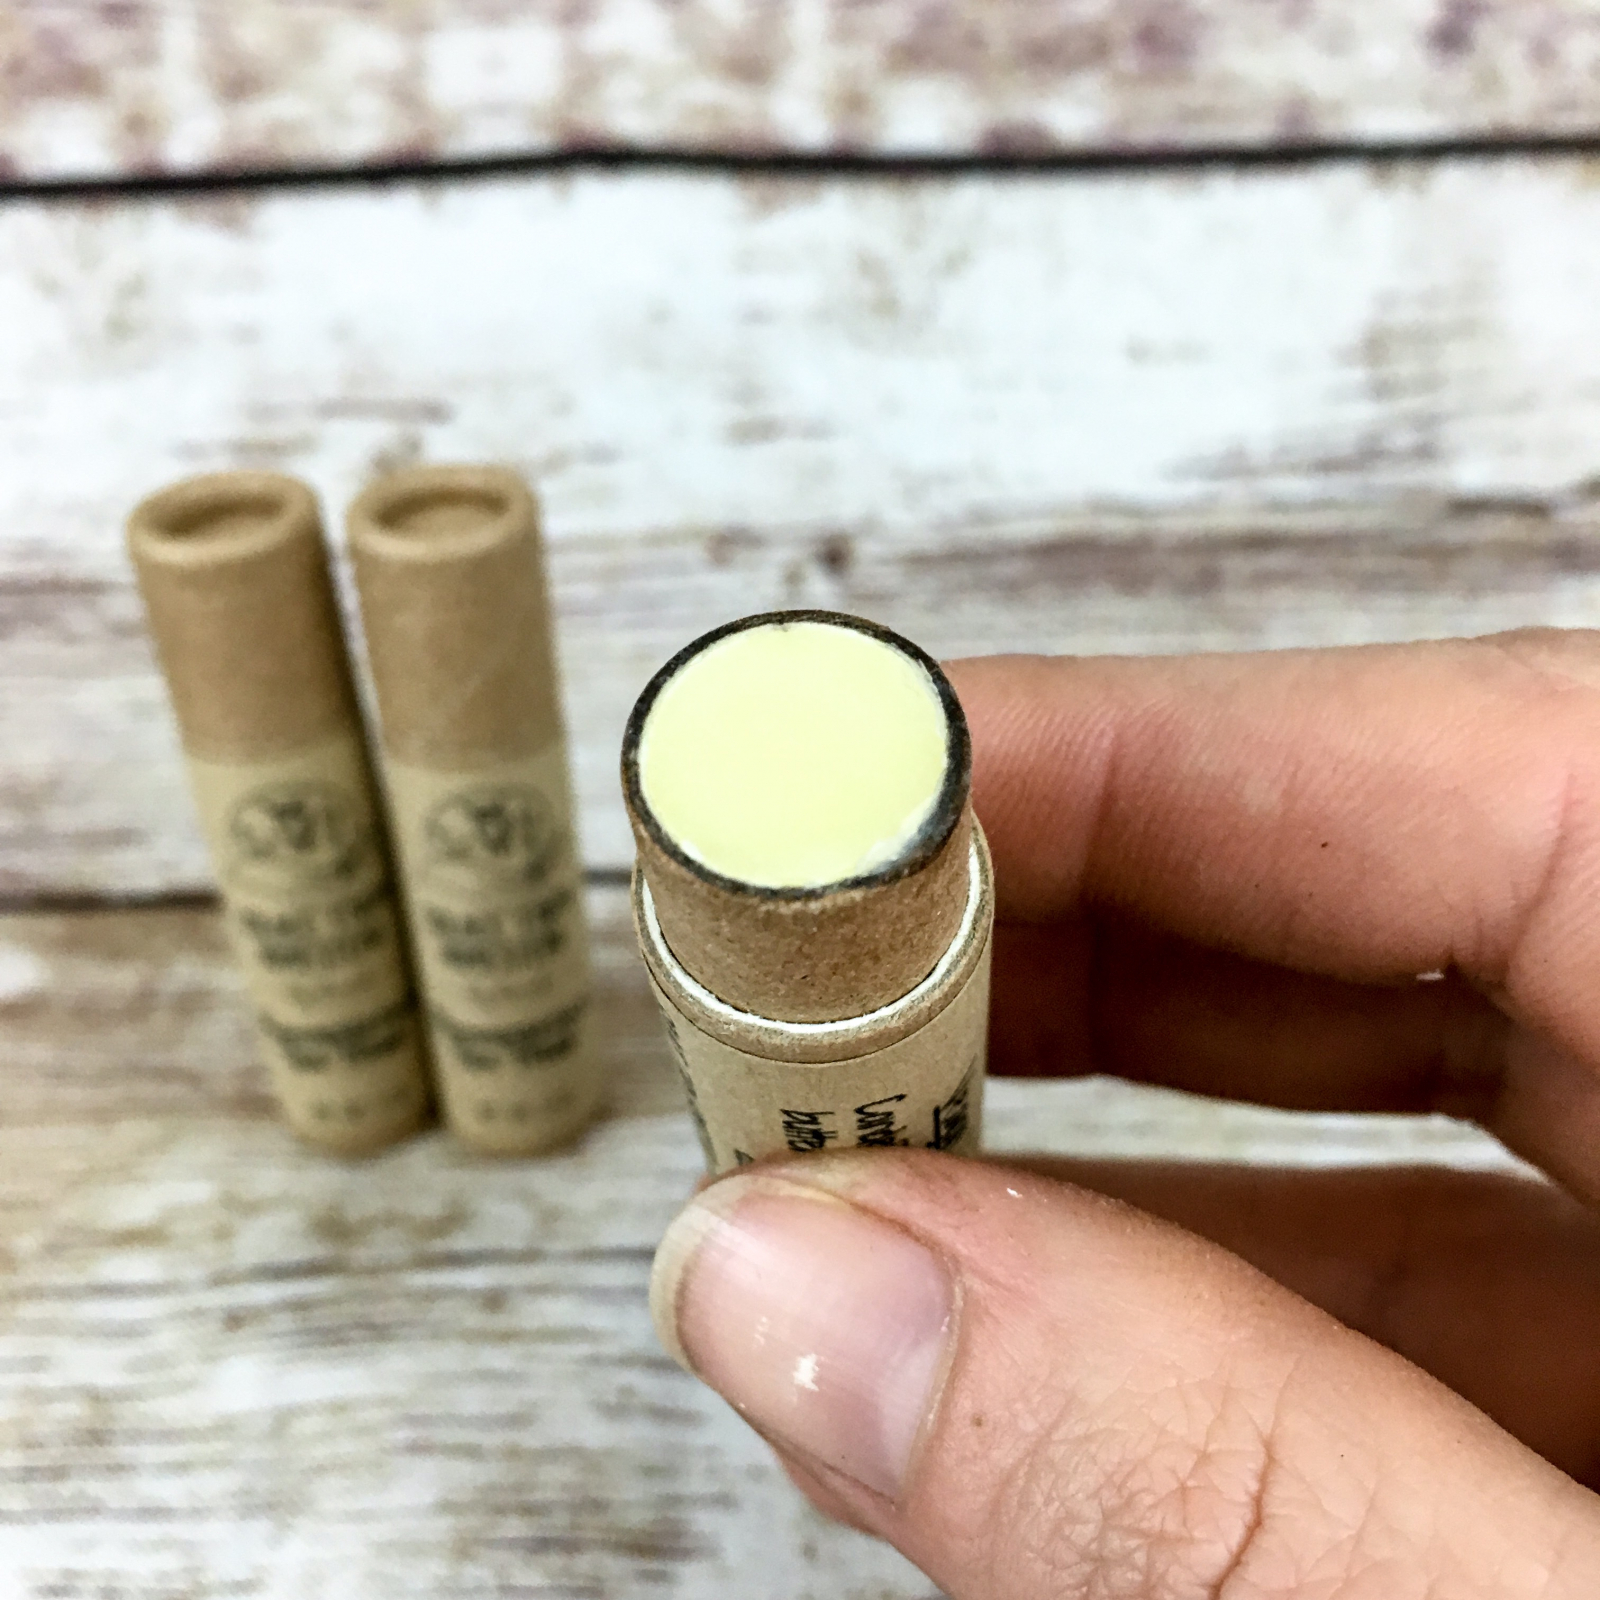 Vegan Lip Balm Sweet Mint by Eco Lips flavor 3 Pack Natural Bee Free with Candelilla  Wax Organic Cocoa Butter & Coconut Oil Lip Care. 100% Plastic-Free Plant  Pod Packaging - Made